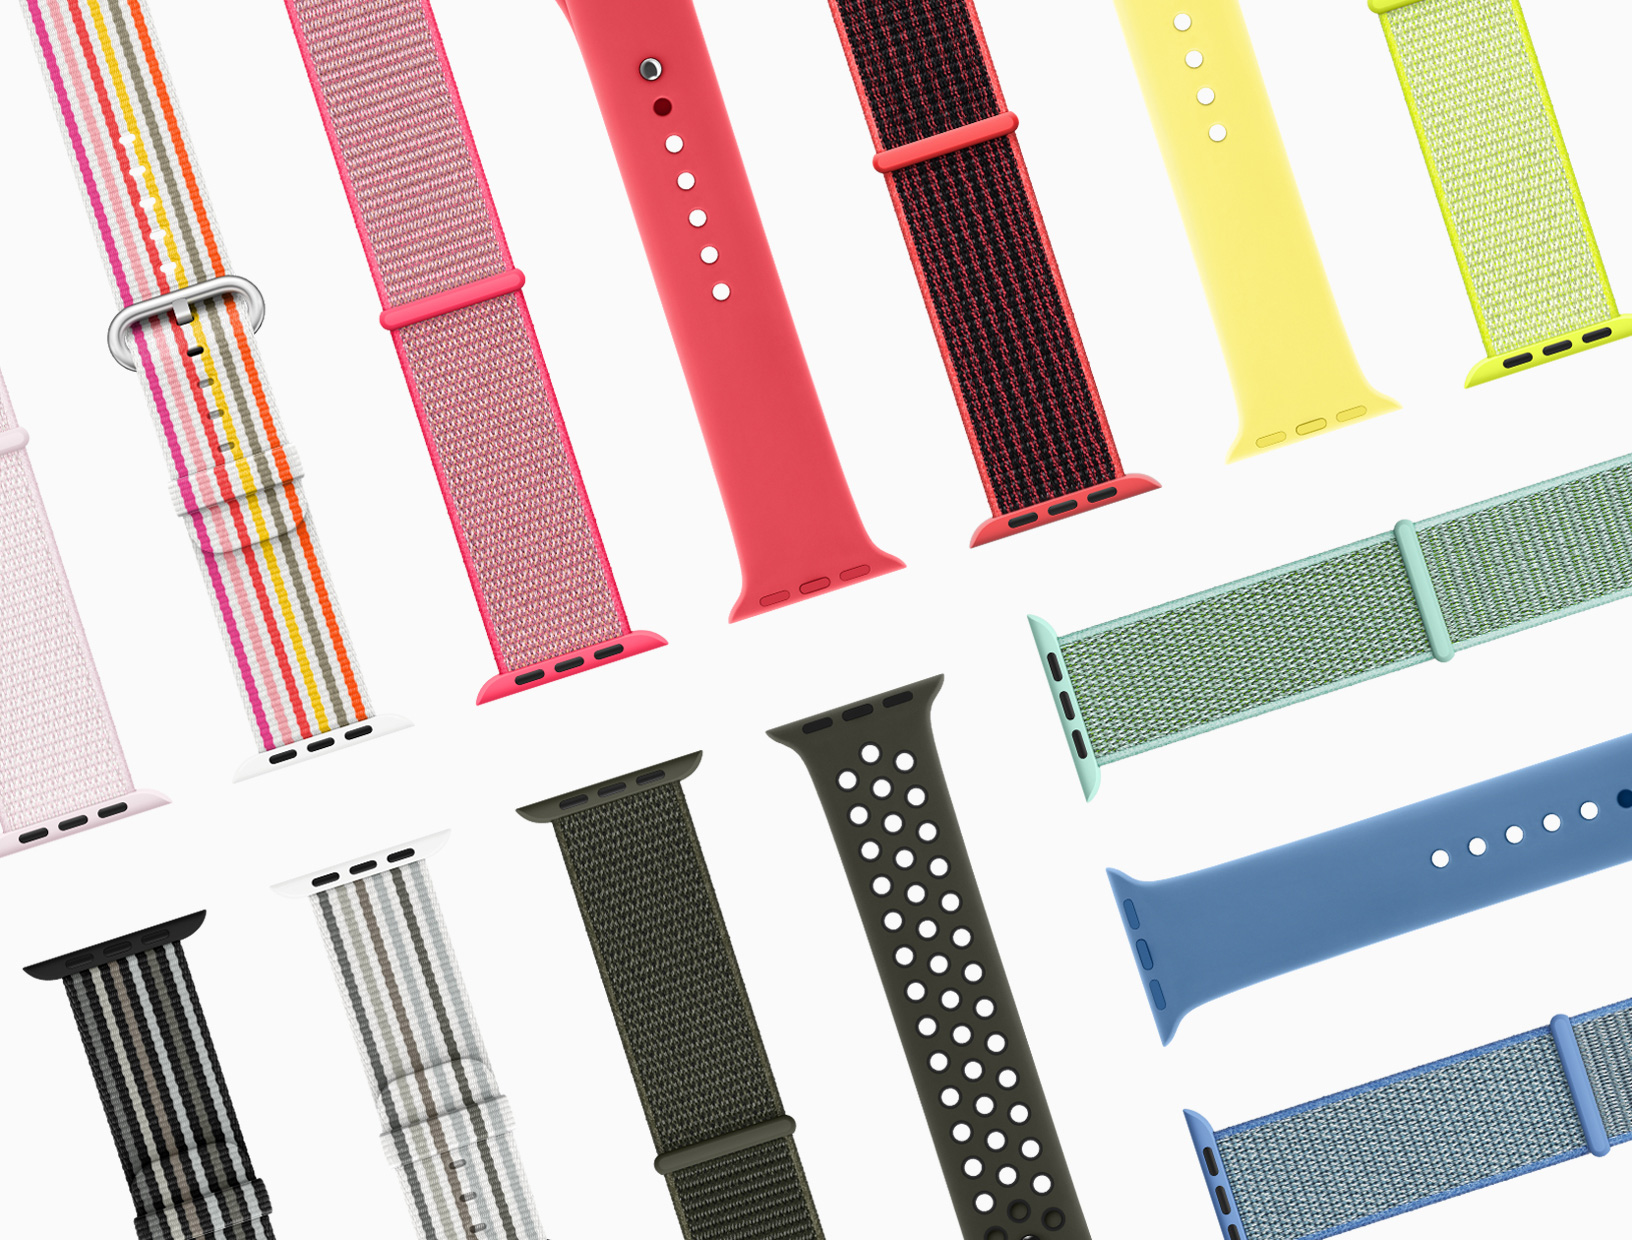 New Apple Watch bands feature spring colors and styles Apple